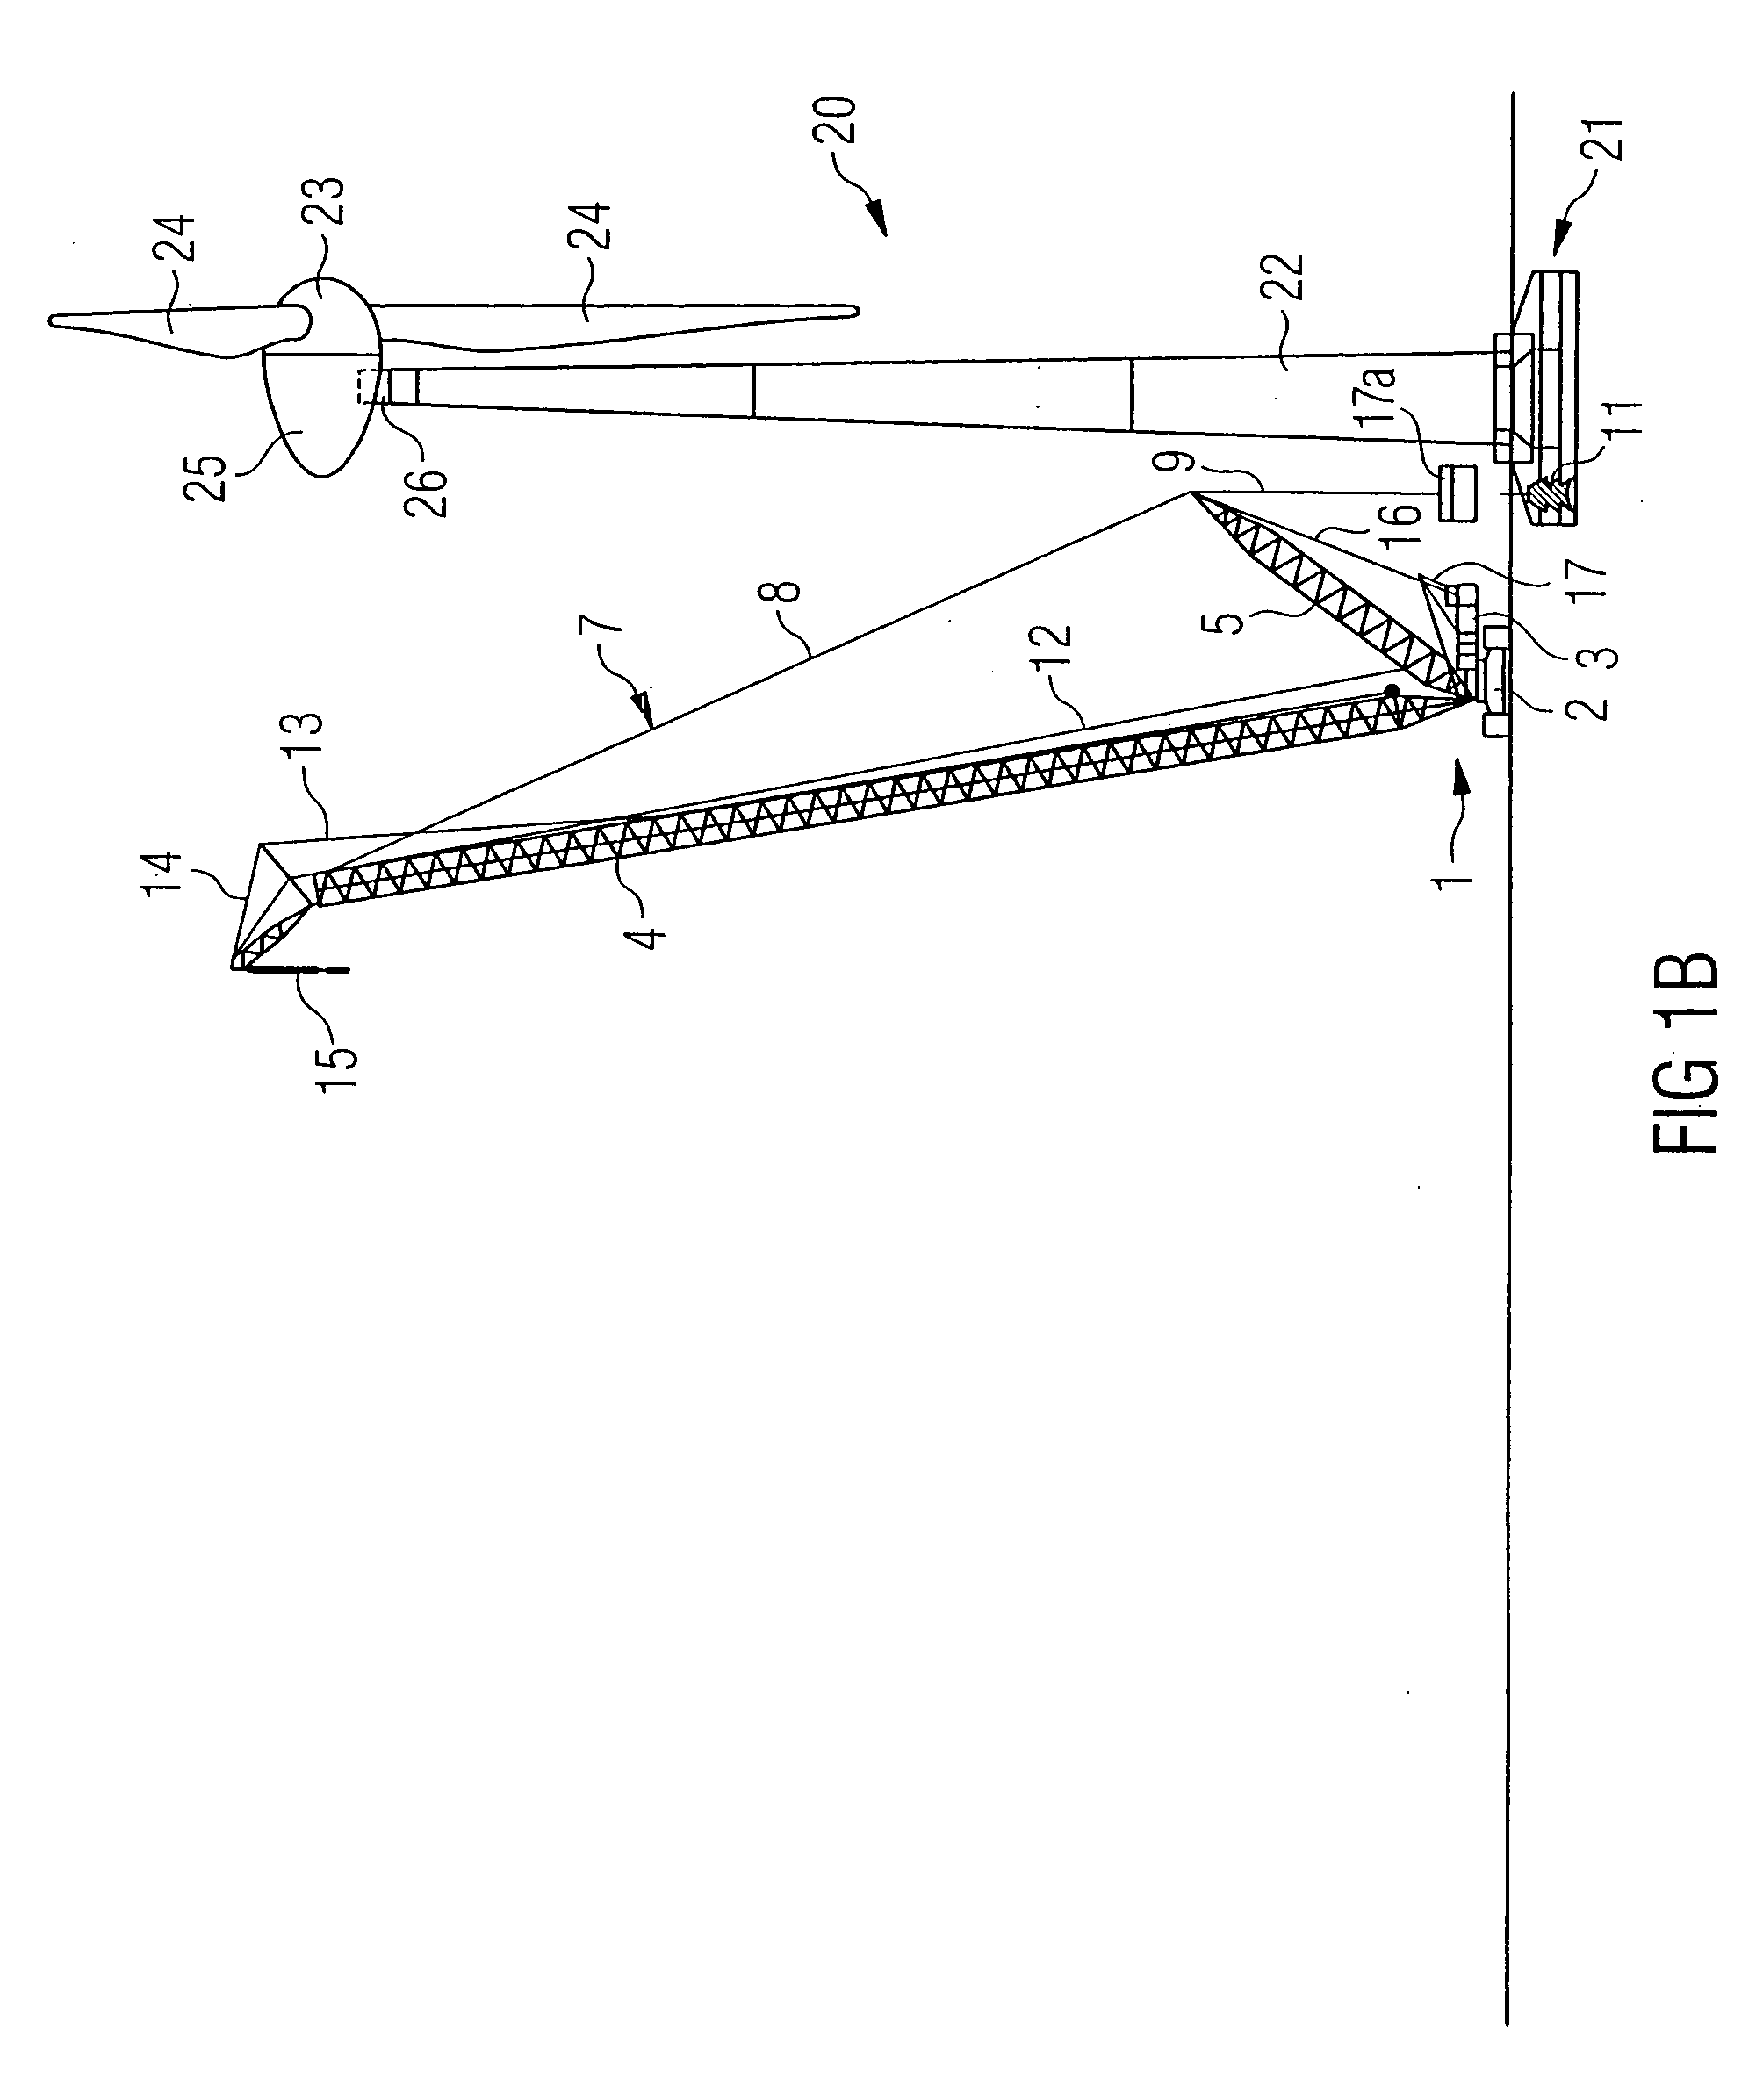 Mobile crane with stationary counterweight